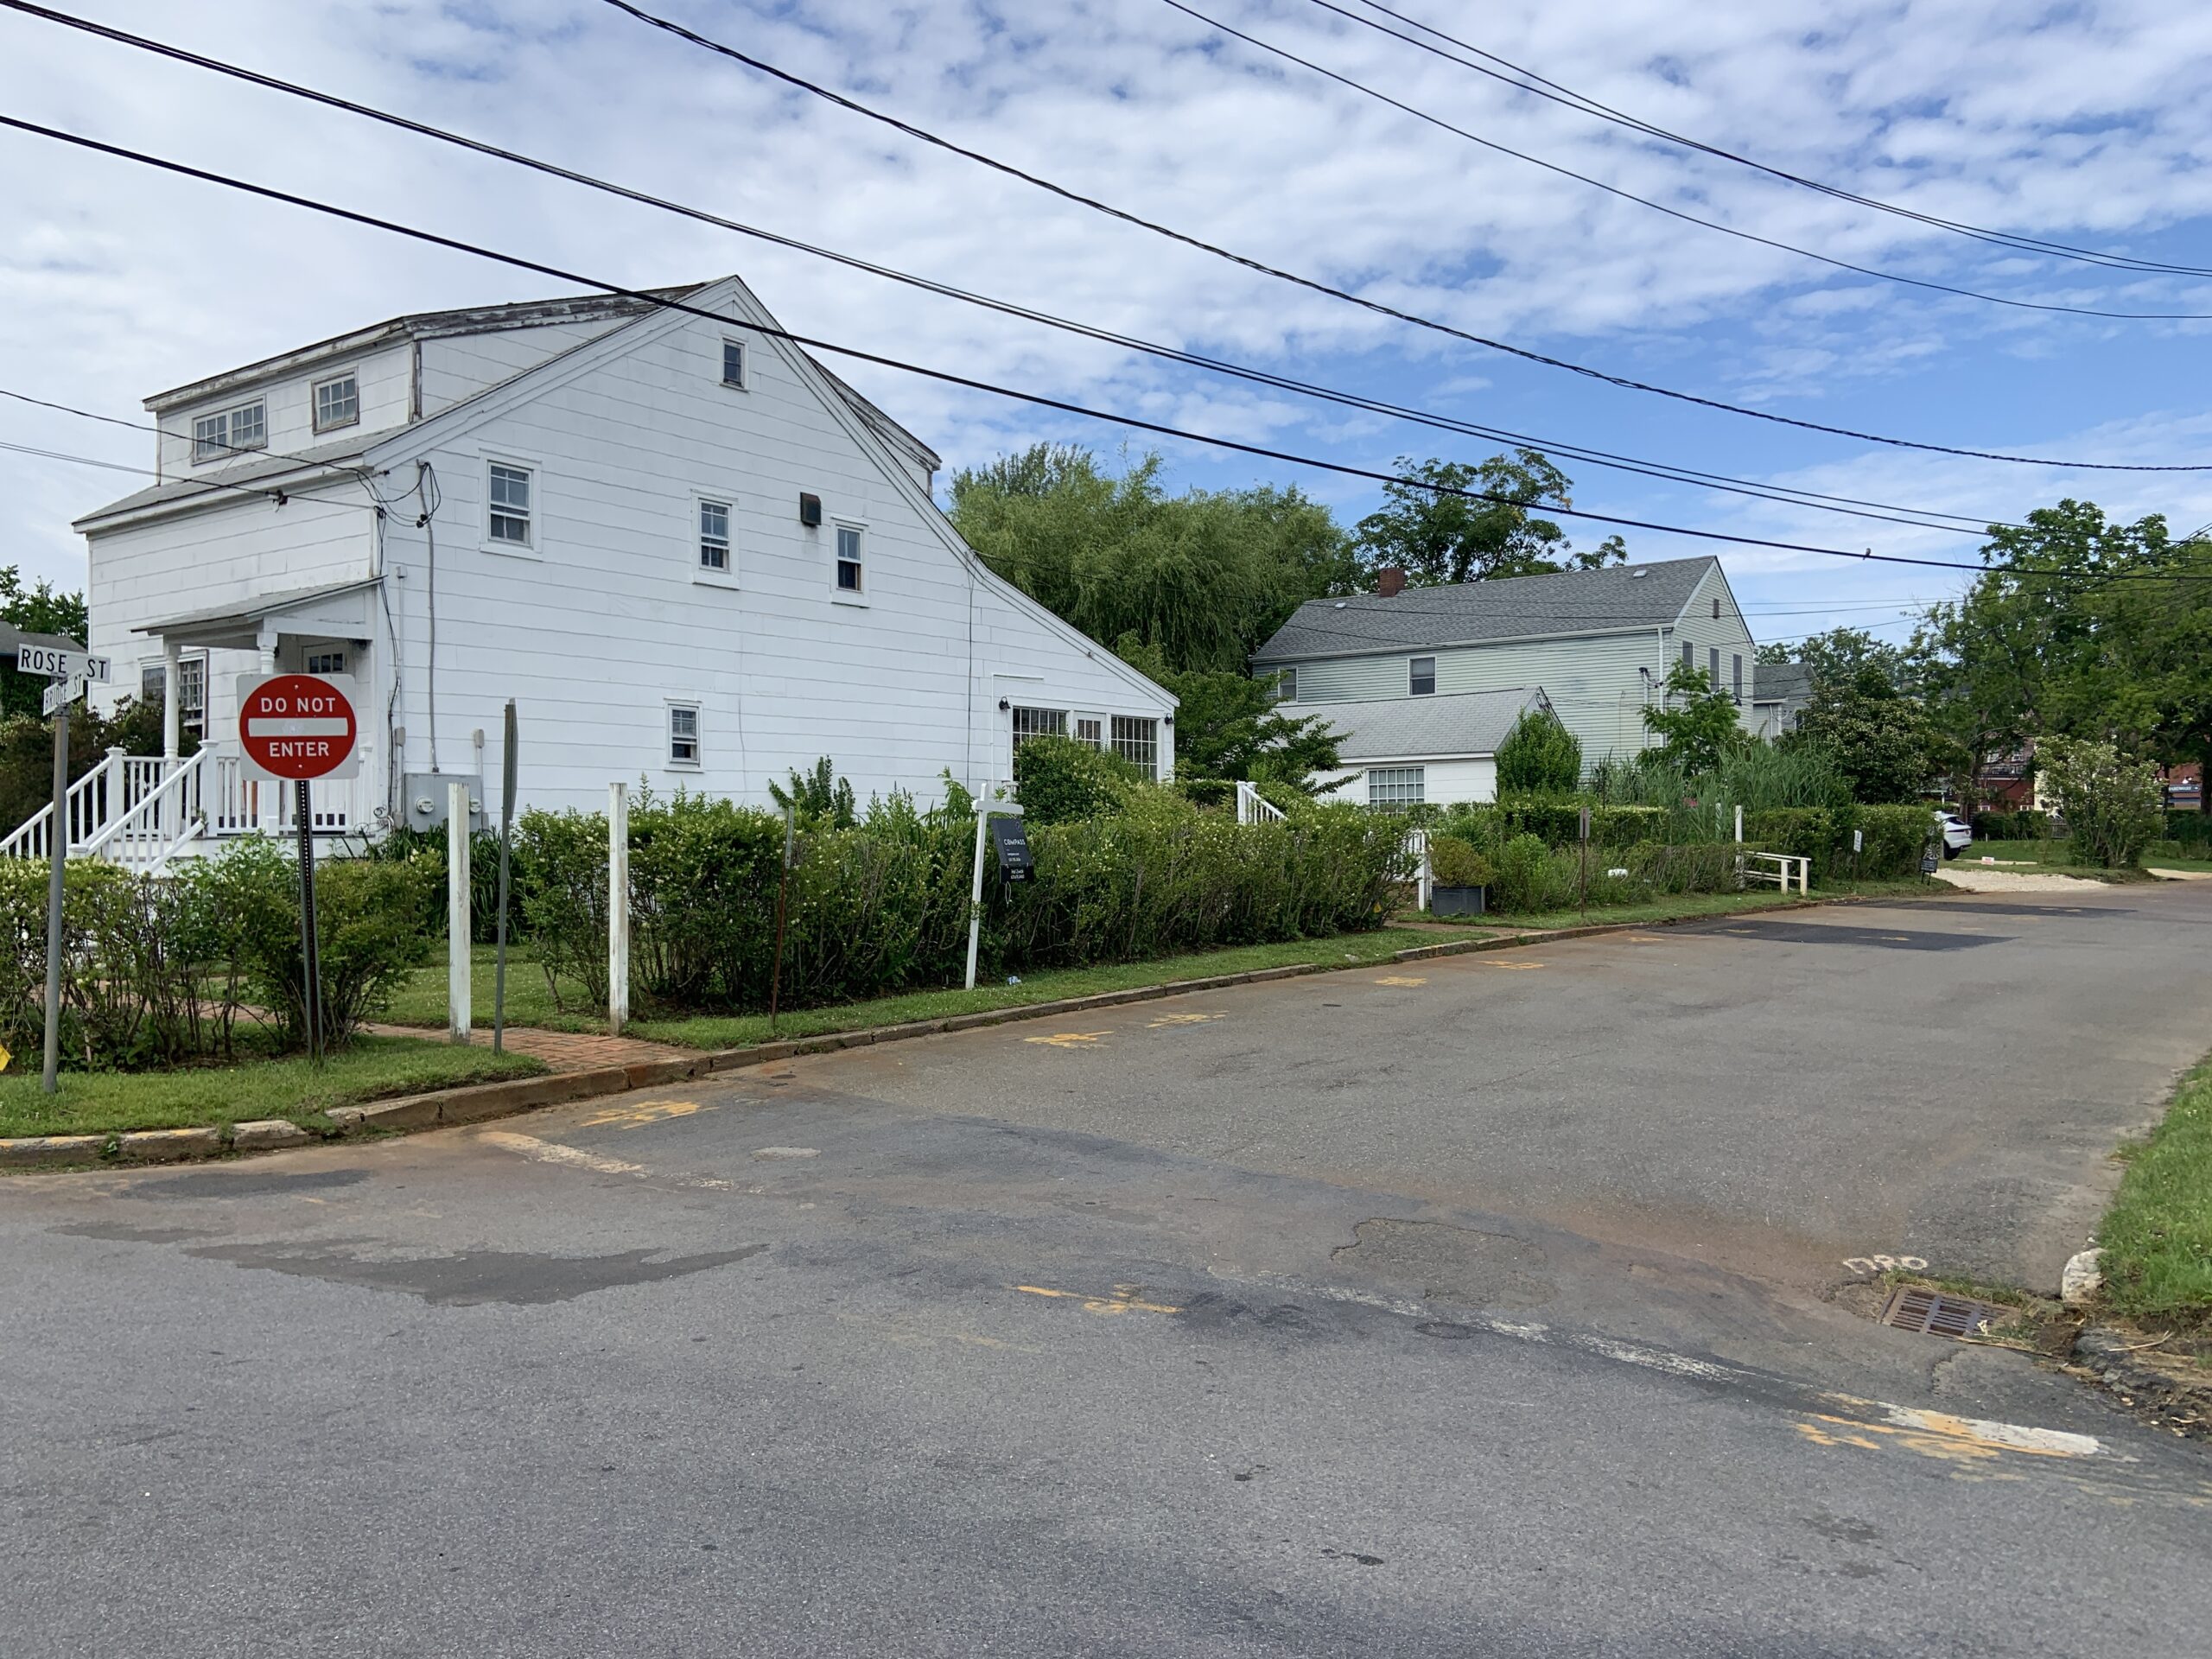 These houses on Rose Street would be replaced with a single three-story building as apart of a major redevelopment proposal between Rose and Bridge streets in Sag Harbor. STEPHEN J. KOTZ